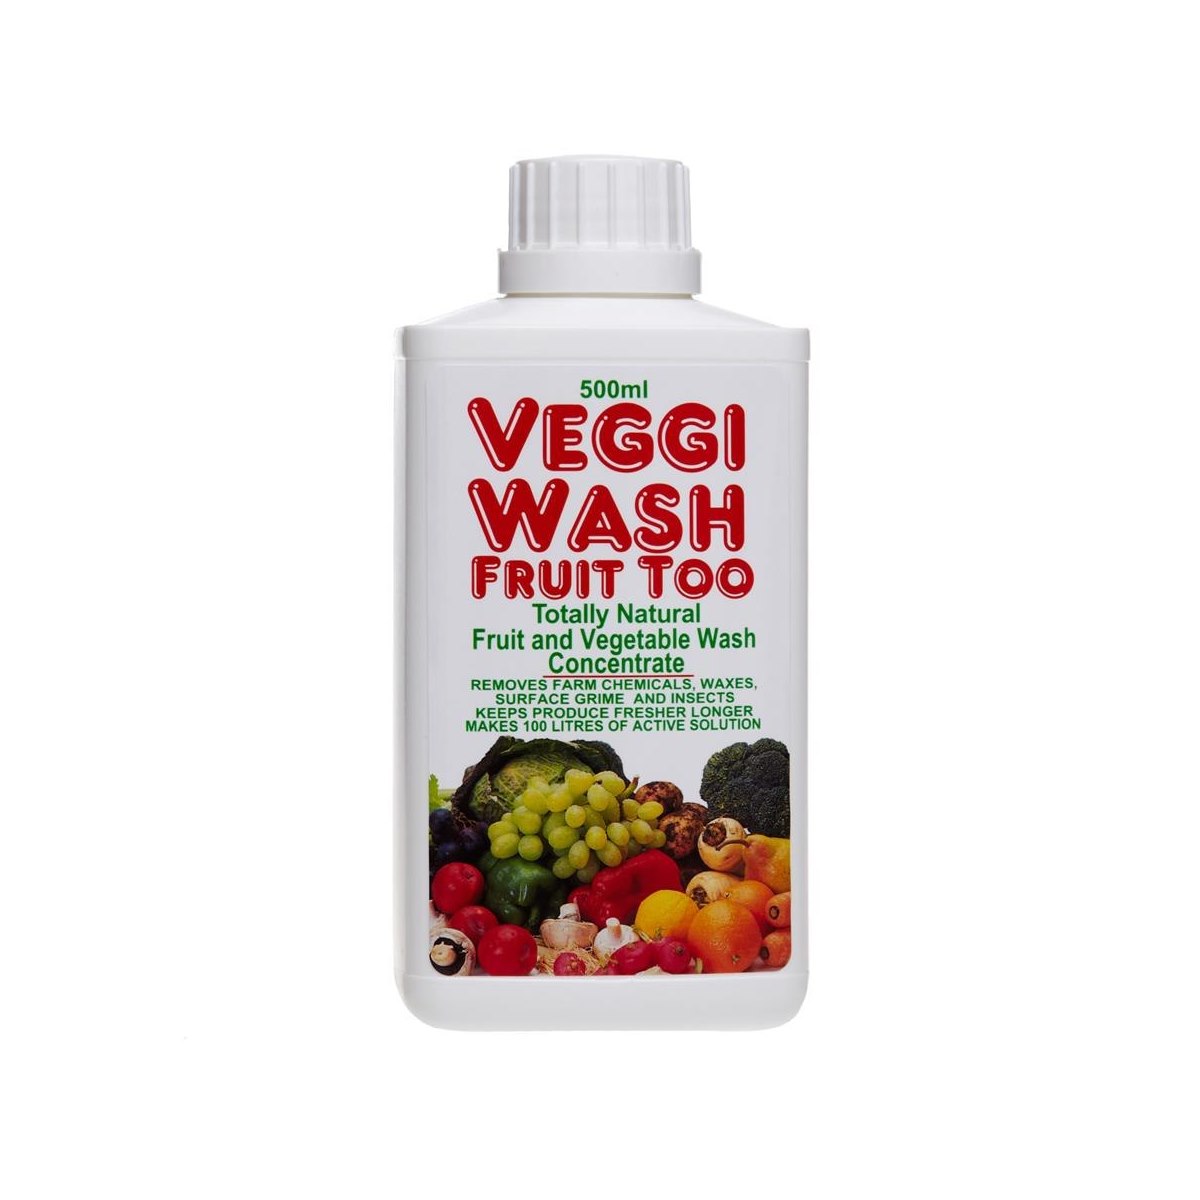 Veggi Wash Fruit Too Concentrated 500ml